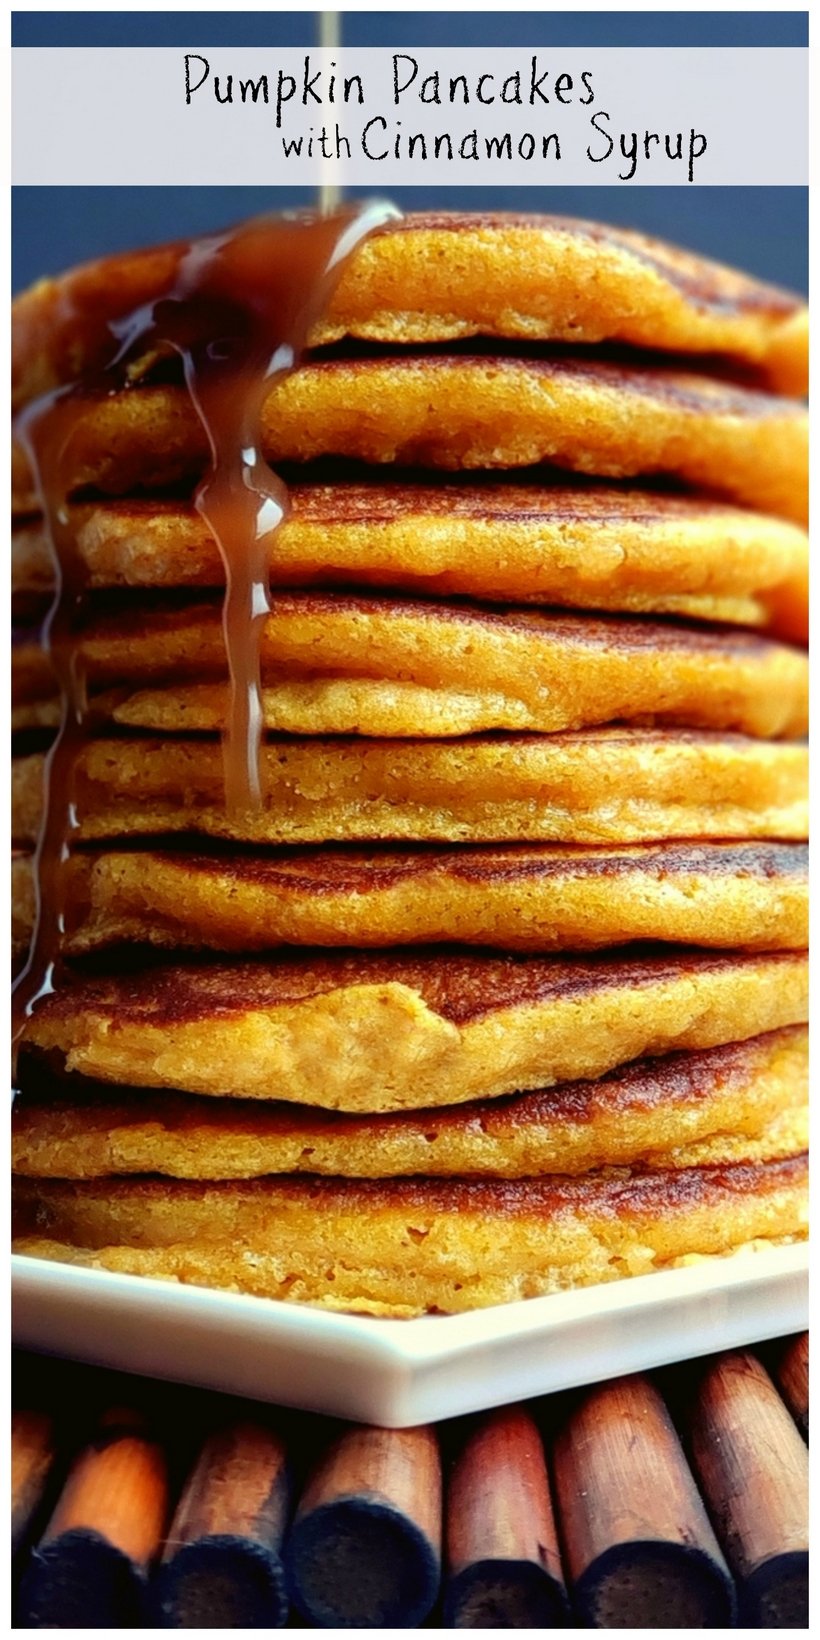 Pumpkin Pancakes with Homemade Cinnamon syrup are extra fluffy and made from scratch. These pumpkin pancakes and syrup are made from everyday ingredients and the easy answer to a flavor packed fall breakfast. The easy homemade syrup recipe is perfect for pumpkin recipes. This is a great fall breakfast idea. #noblepig #pumpkinpancakes #pumpkinrecipes #homemadesyruprecipe #pumpkinpancakerecipe #fallbreakfastideas #homemadesyrupforpancakes #pumpkinpancakeseasy #fallbreakfast #homemadesyrup  via @cmpollak1